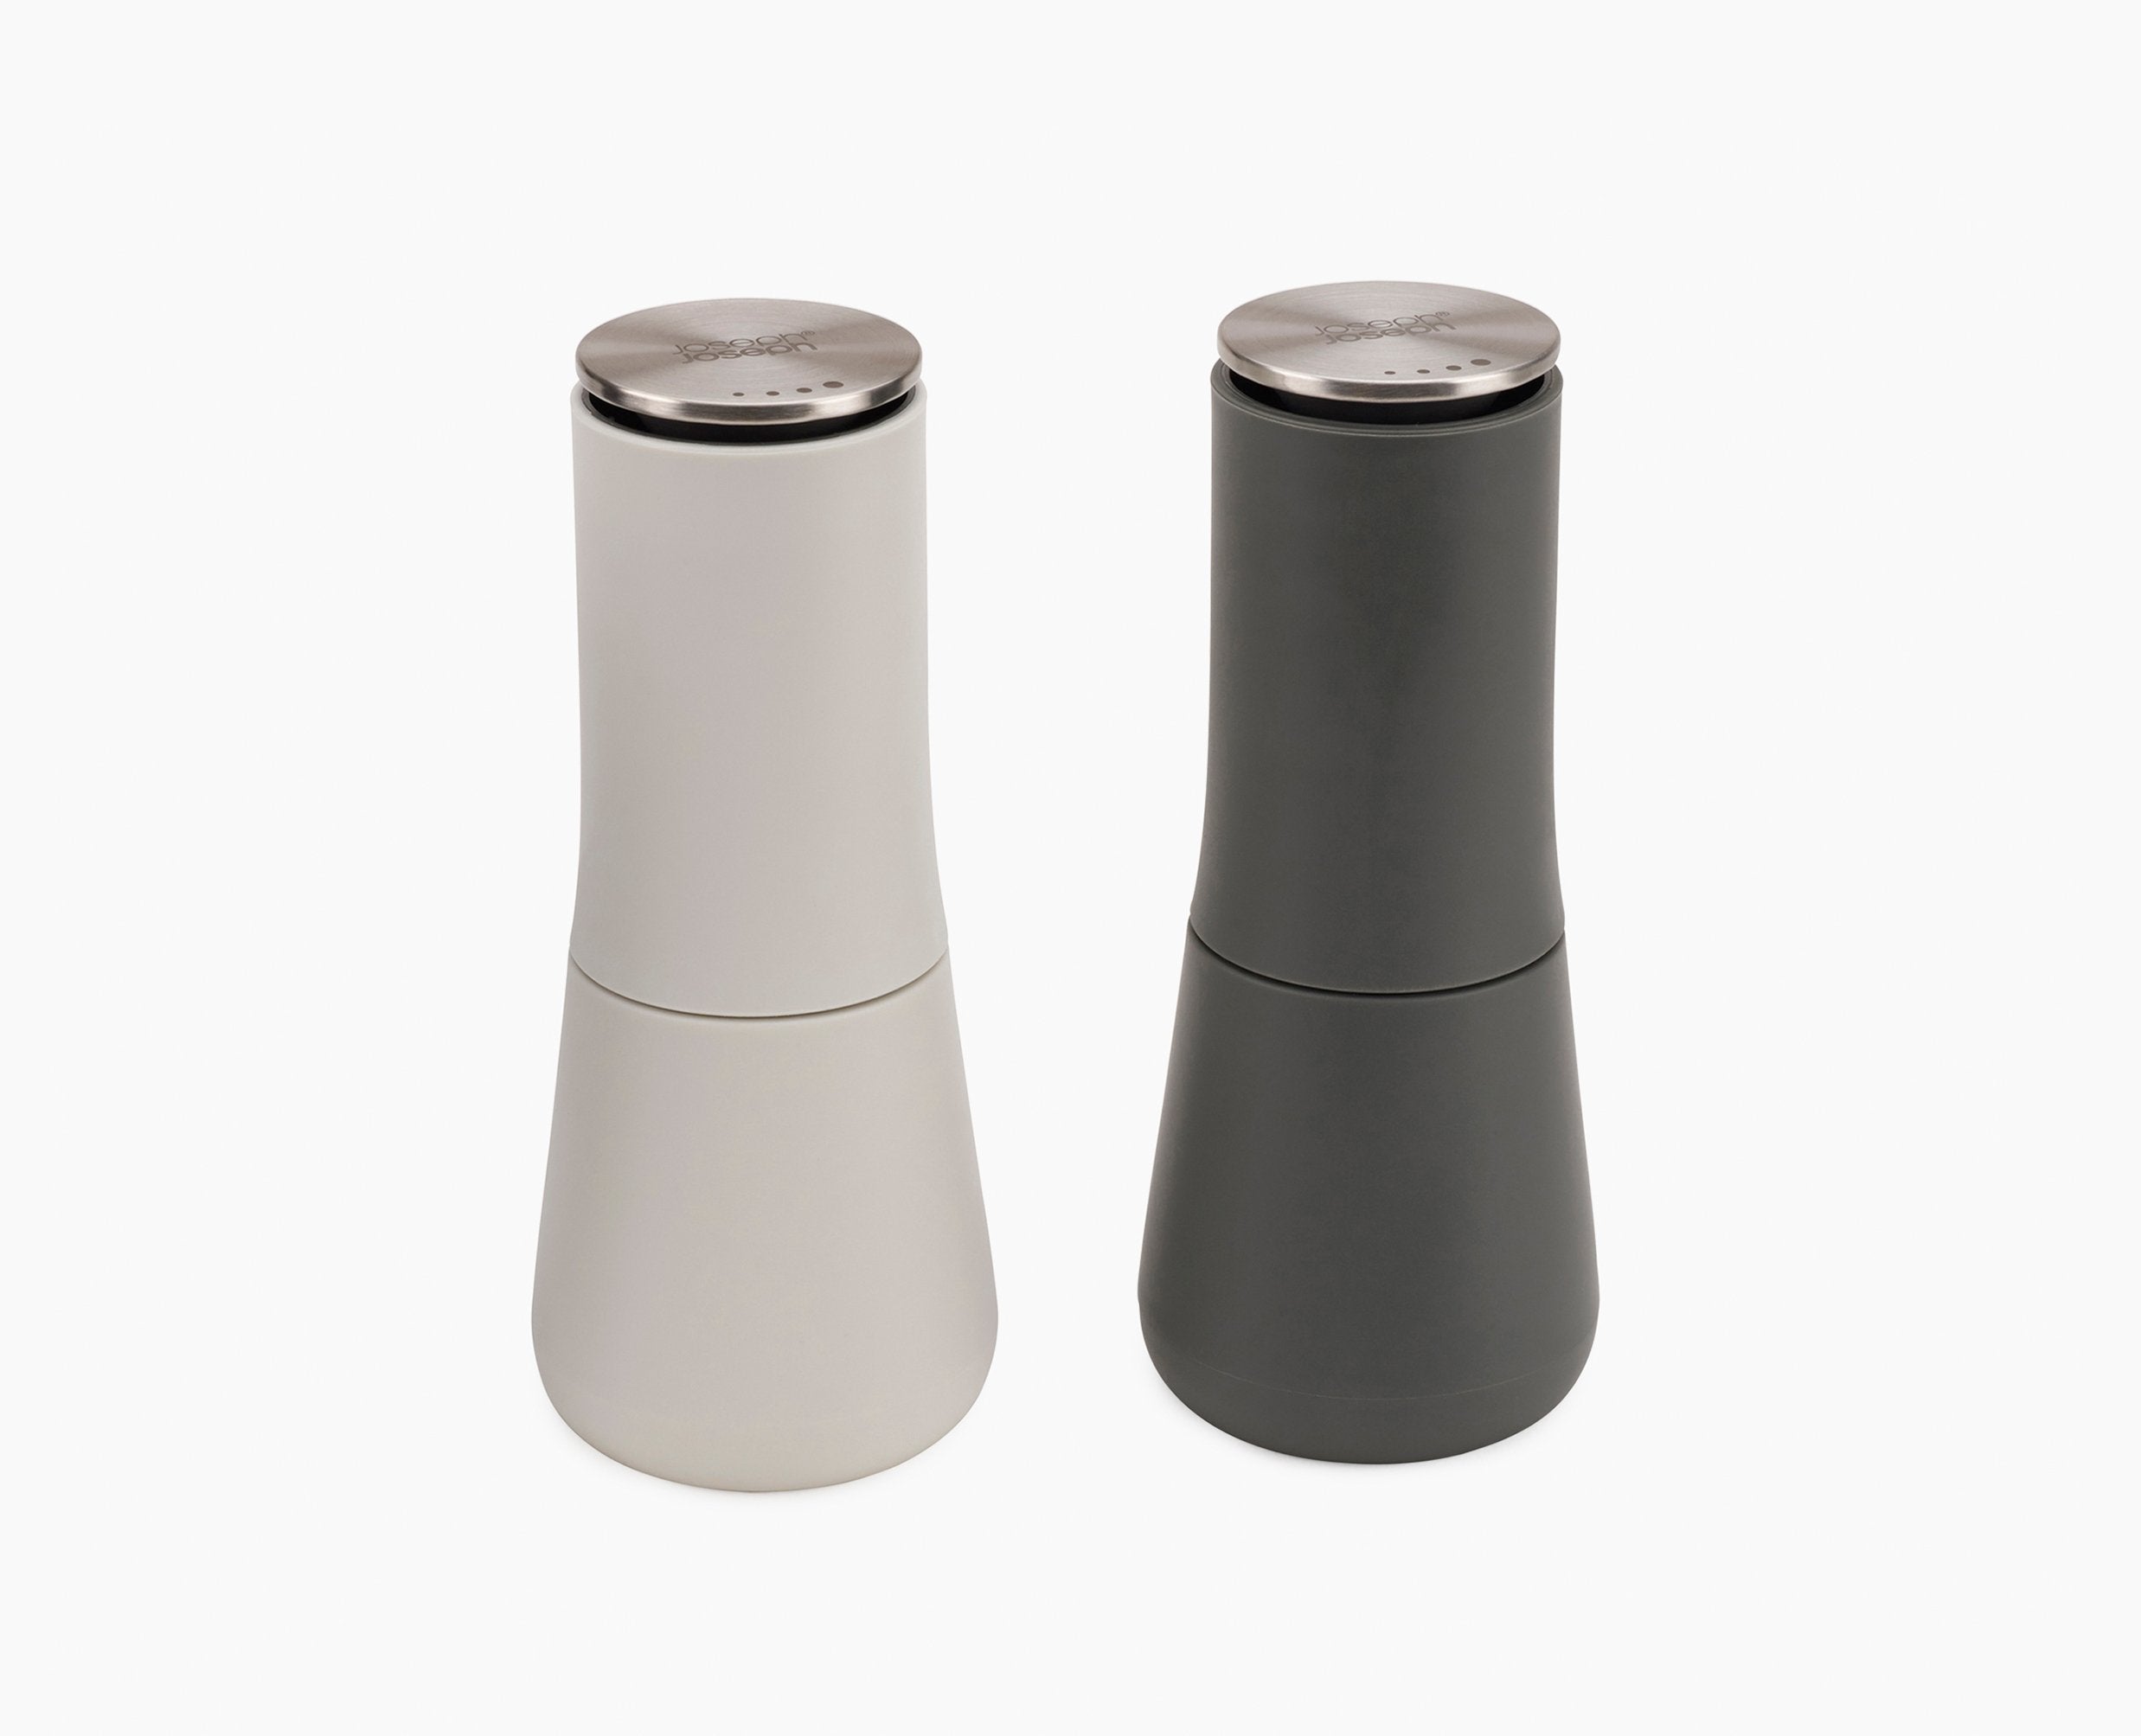 BEON.COM.AU  The clever design of these elegant salt and pepper mills means the grinding mechanism is at the top so any excess grounds fall back inside the unit rather than onto the surface they are set down on.  Inverted design keeps table tops mess-free Simply twist base to grind Adjust grinding size by tw... Joseph Joseph at BEON.COM.AU